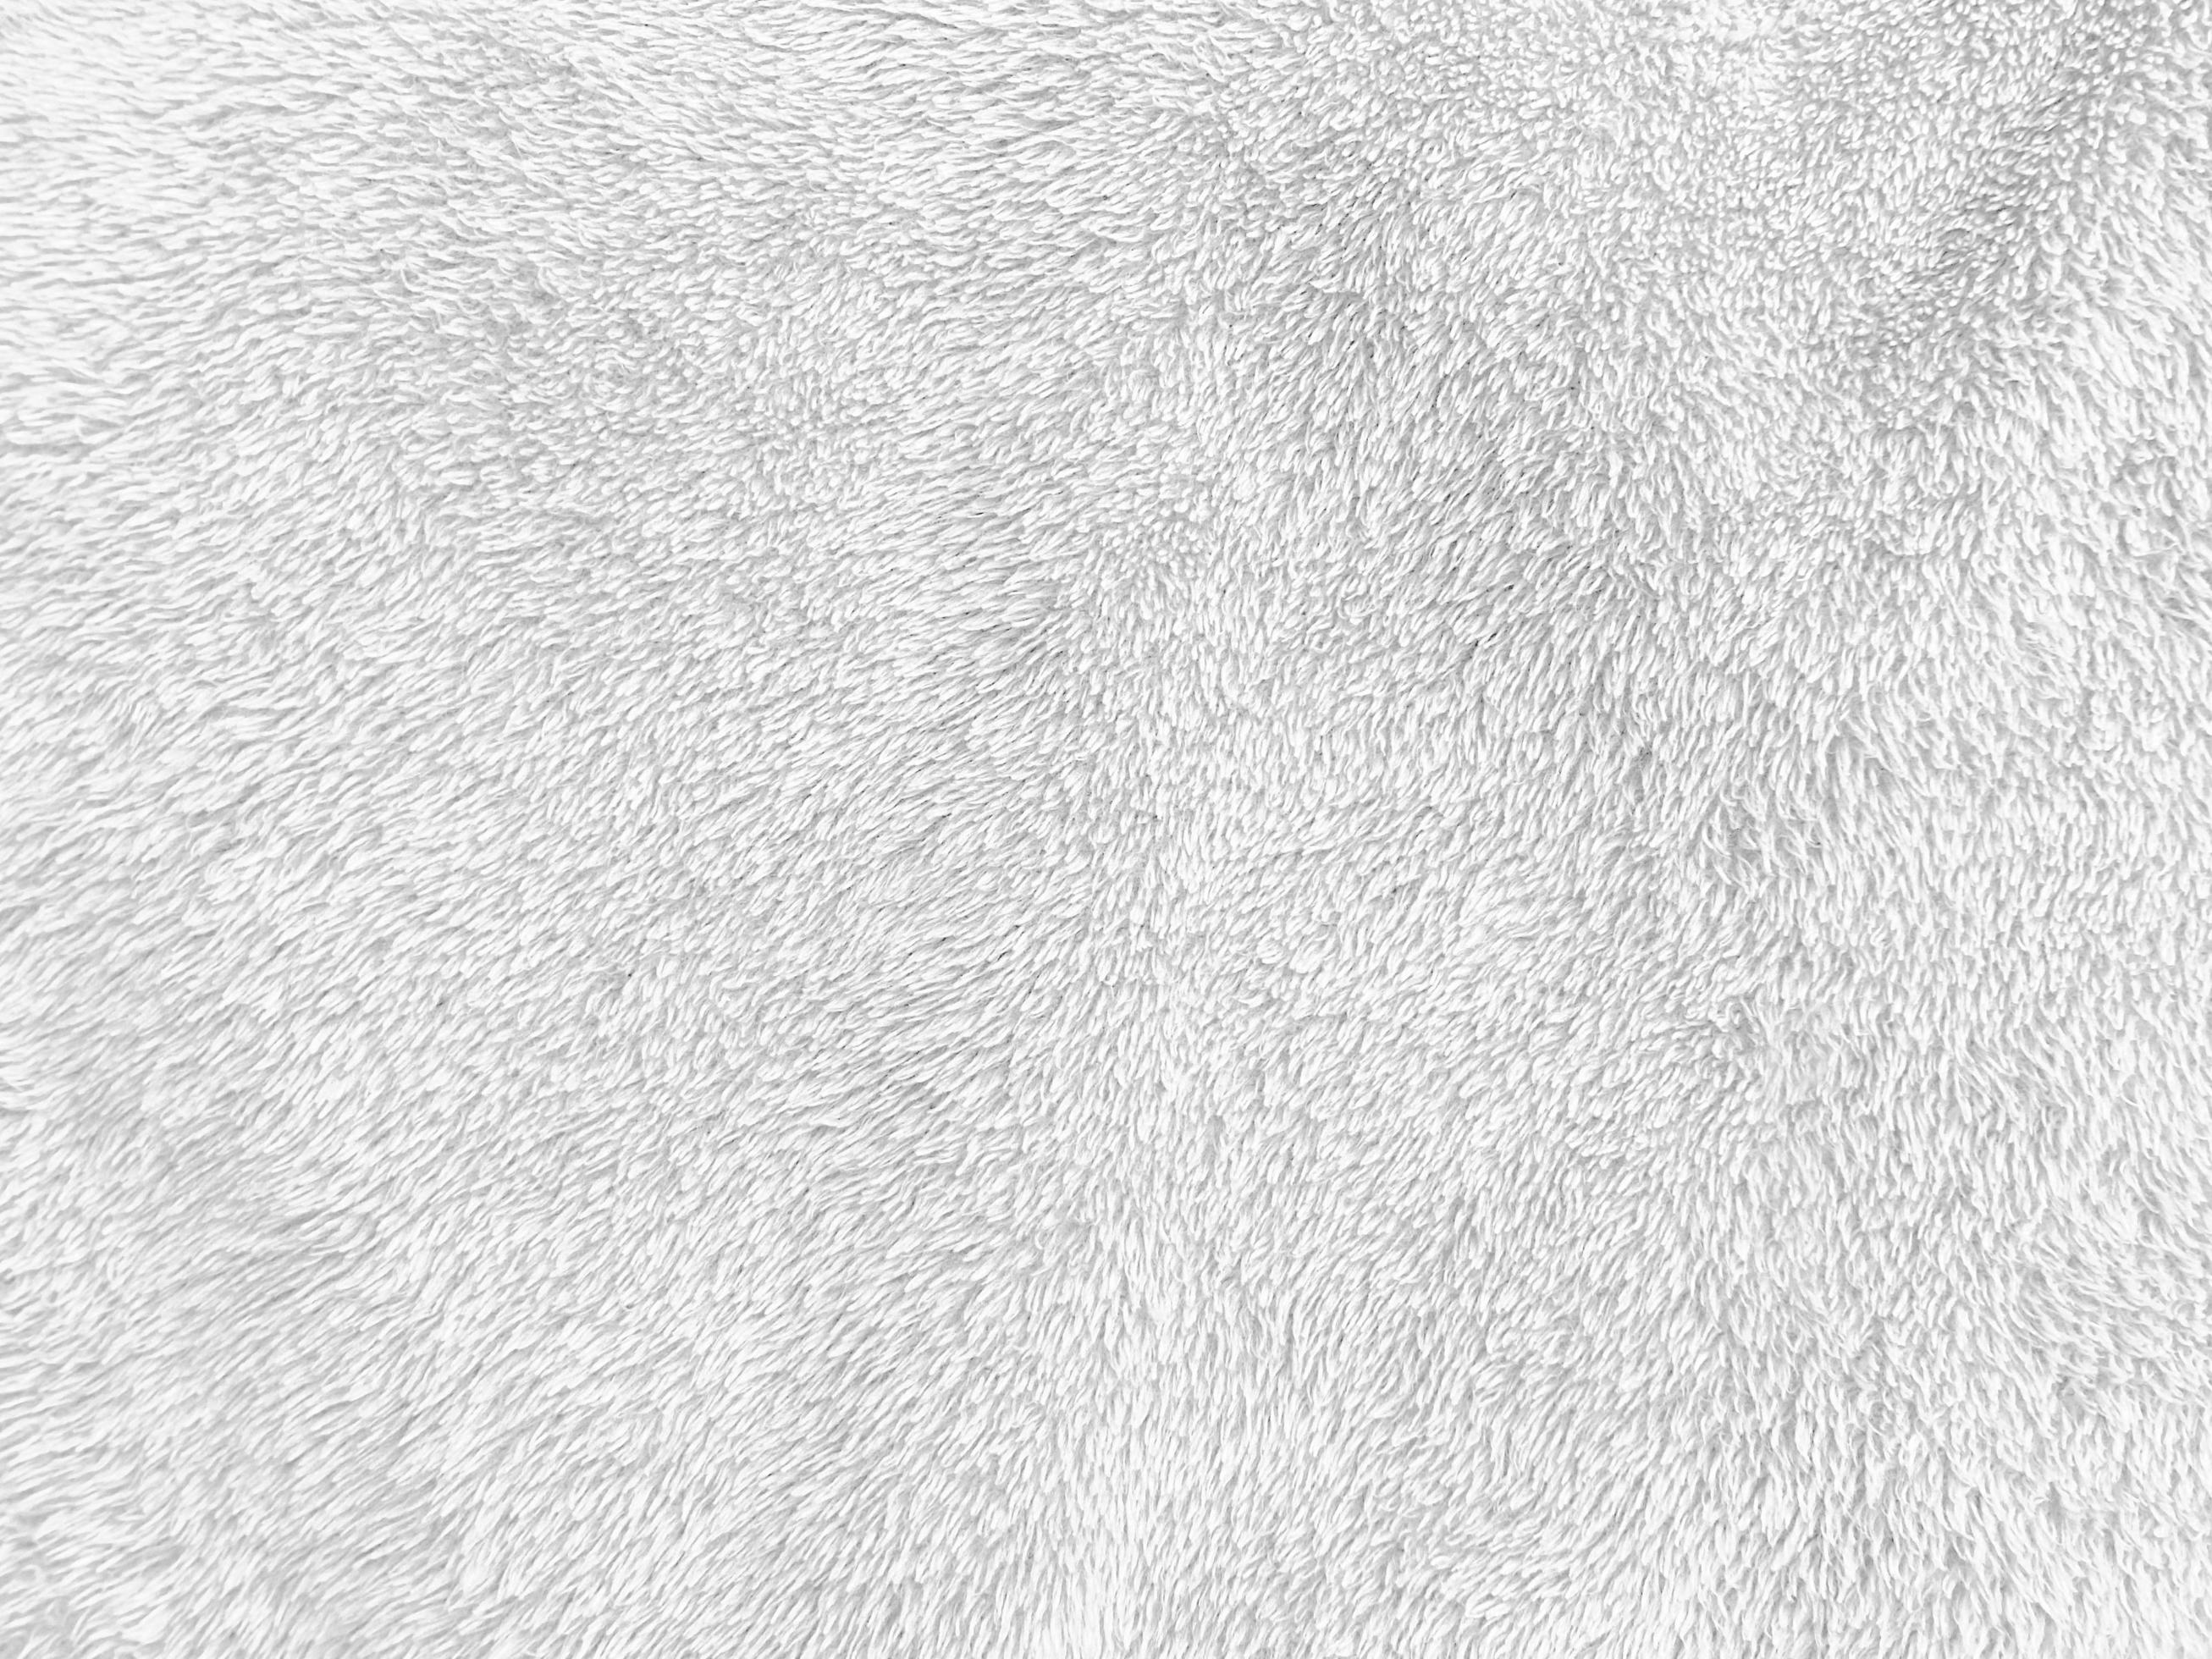 https://static.vecteezy.com/system/resources/previews/015/233/824/large_2x/white-clean-wool-texture-background-light-natural-sheep-wool-white-seamless-cotton-texture-of-fluffy-fur-for-designers-close-up-fragment-white-wool-carpet-free-photo.jpg